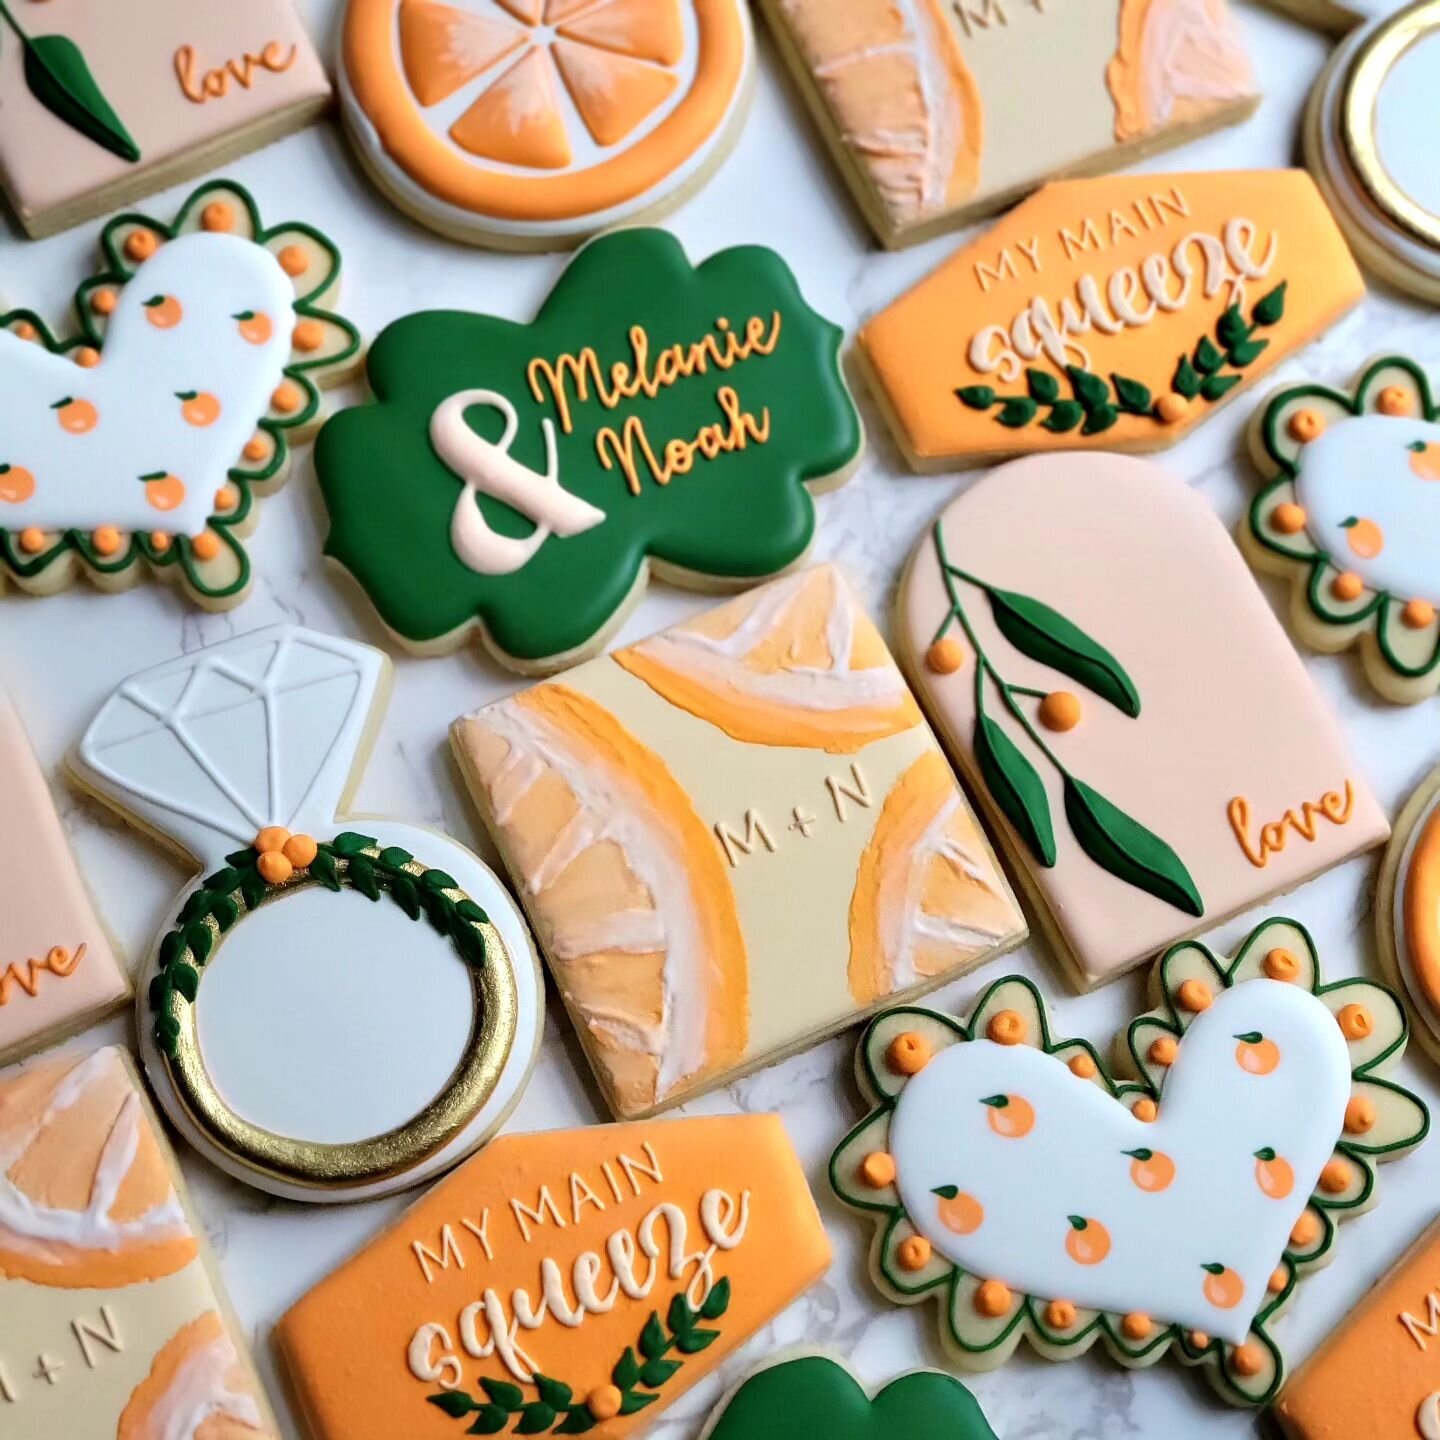 This couple added a little zest to their combined wedding shower with this theme! Congratulations to Melanie &amp; Noah!
.
.
.
#homemade #baking #sugarcookies #royalicing #desserts #dessert #dessertporn #foodporn #food #cookies #cookiesofinstagram #d